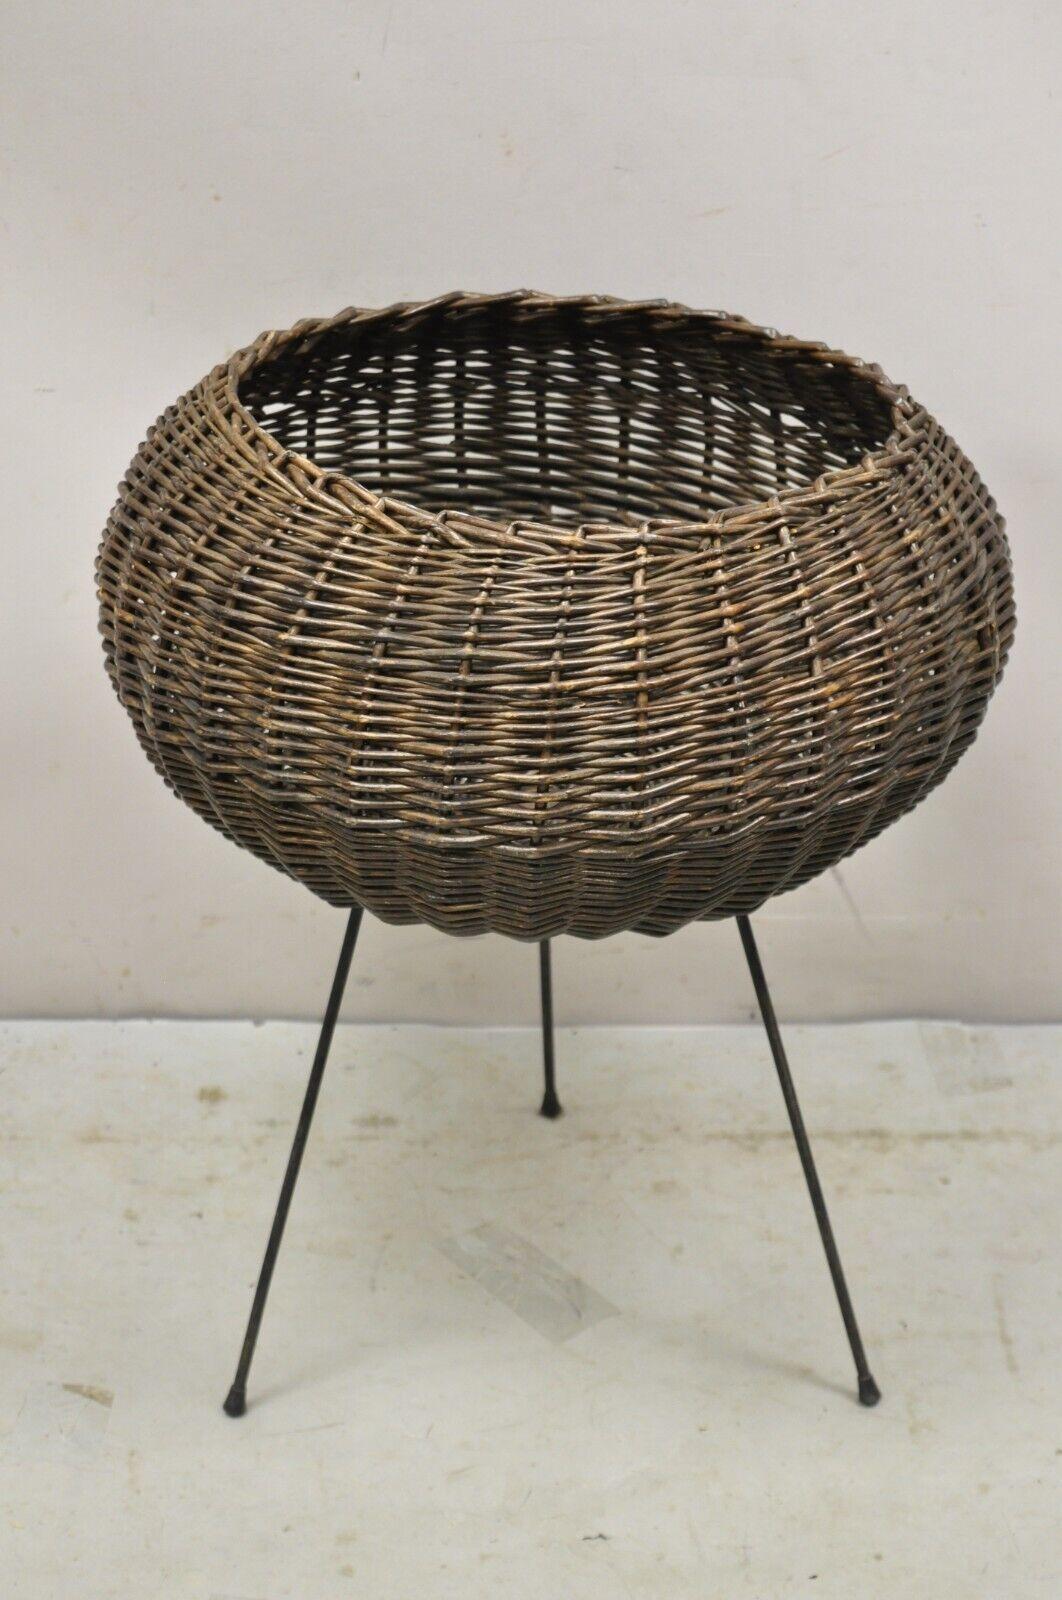 Mid Century Modern Italian Round Wicker Rattan Wrought Iron Planter Stand Arthur Umanoff Style. Item features wrought iron tripod base, round wicker basket, great for use as a storage basket or planter stand, very nice vintage item, clean modernist